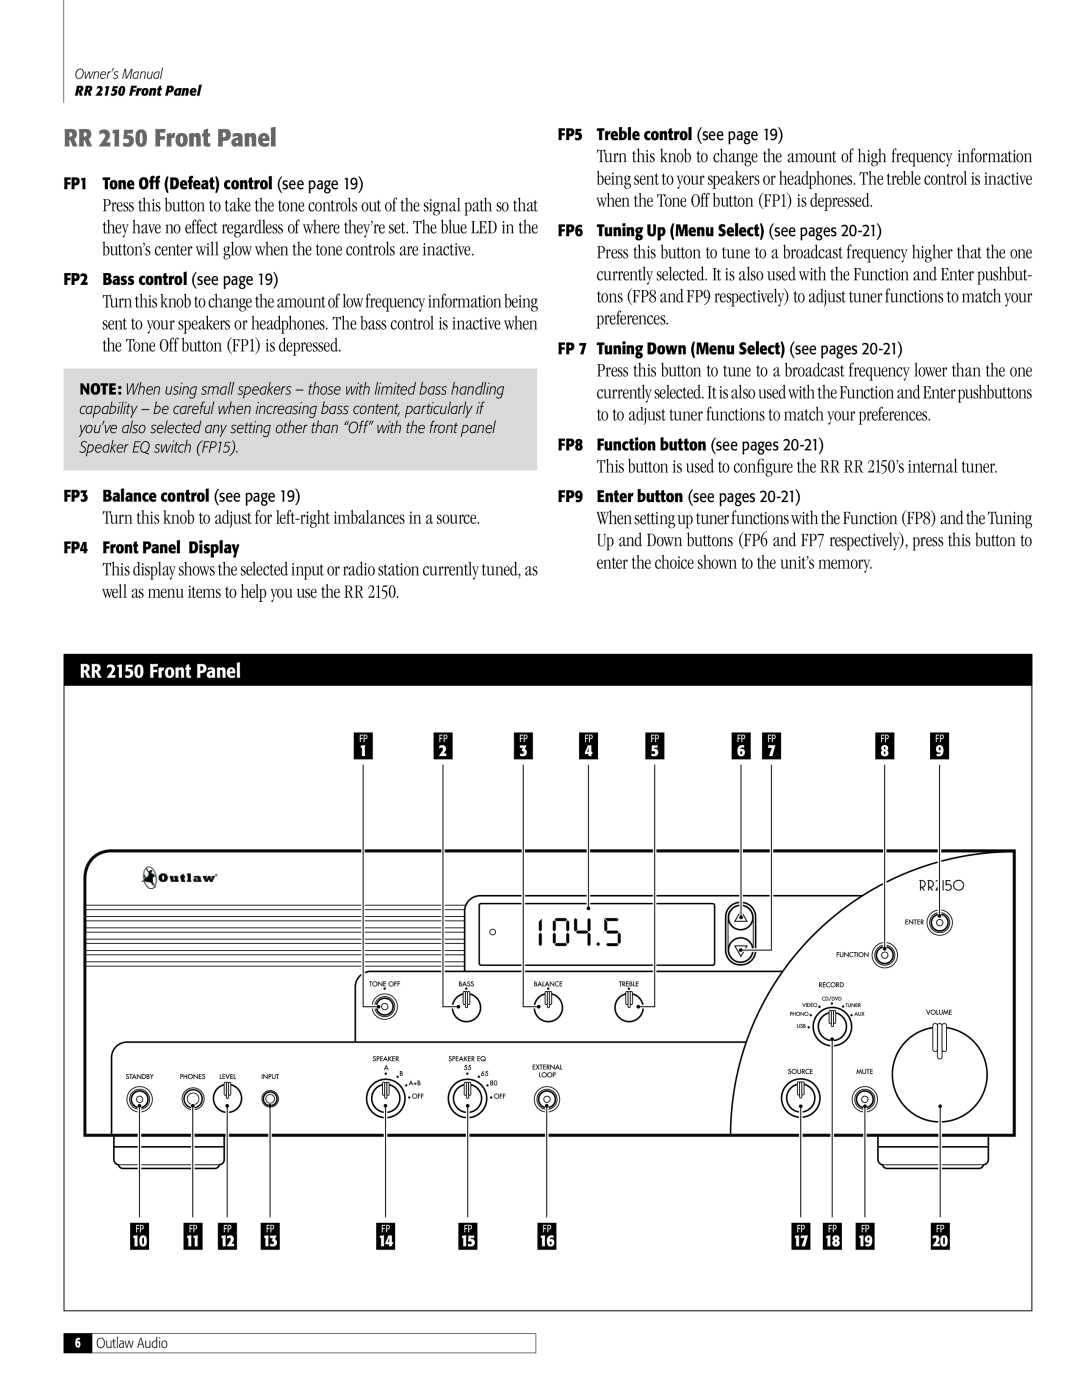 Outlaw Audio owner manual RR 2150 Front Panel, FP1 Tone Off Defeat control see page, FP2 Bass control see page 